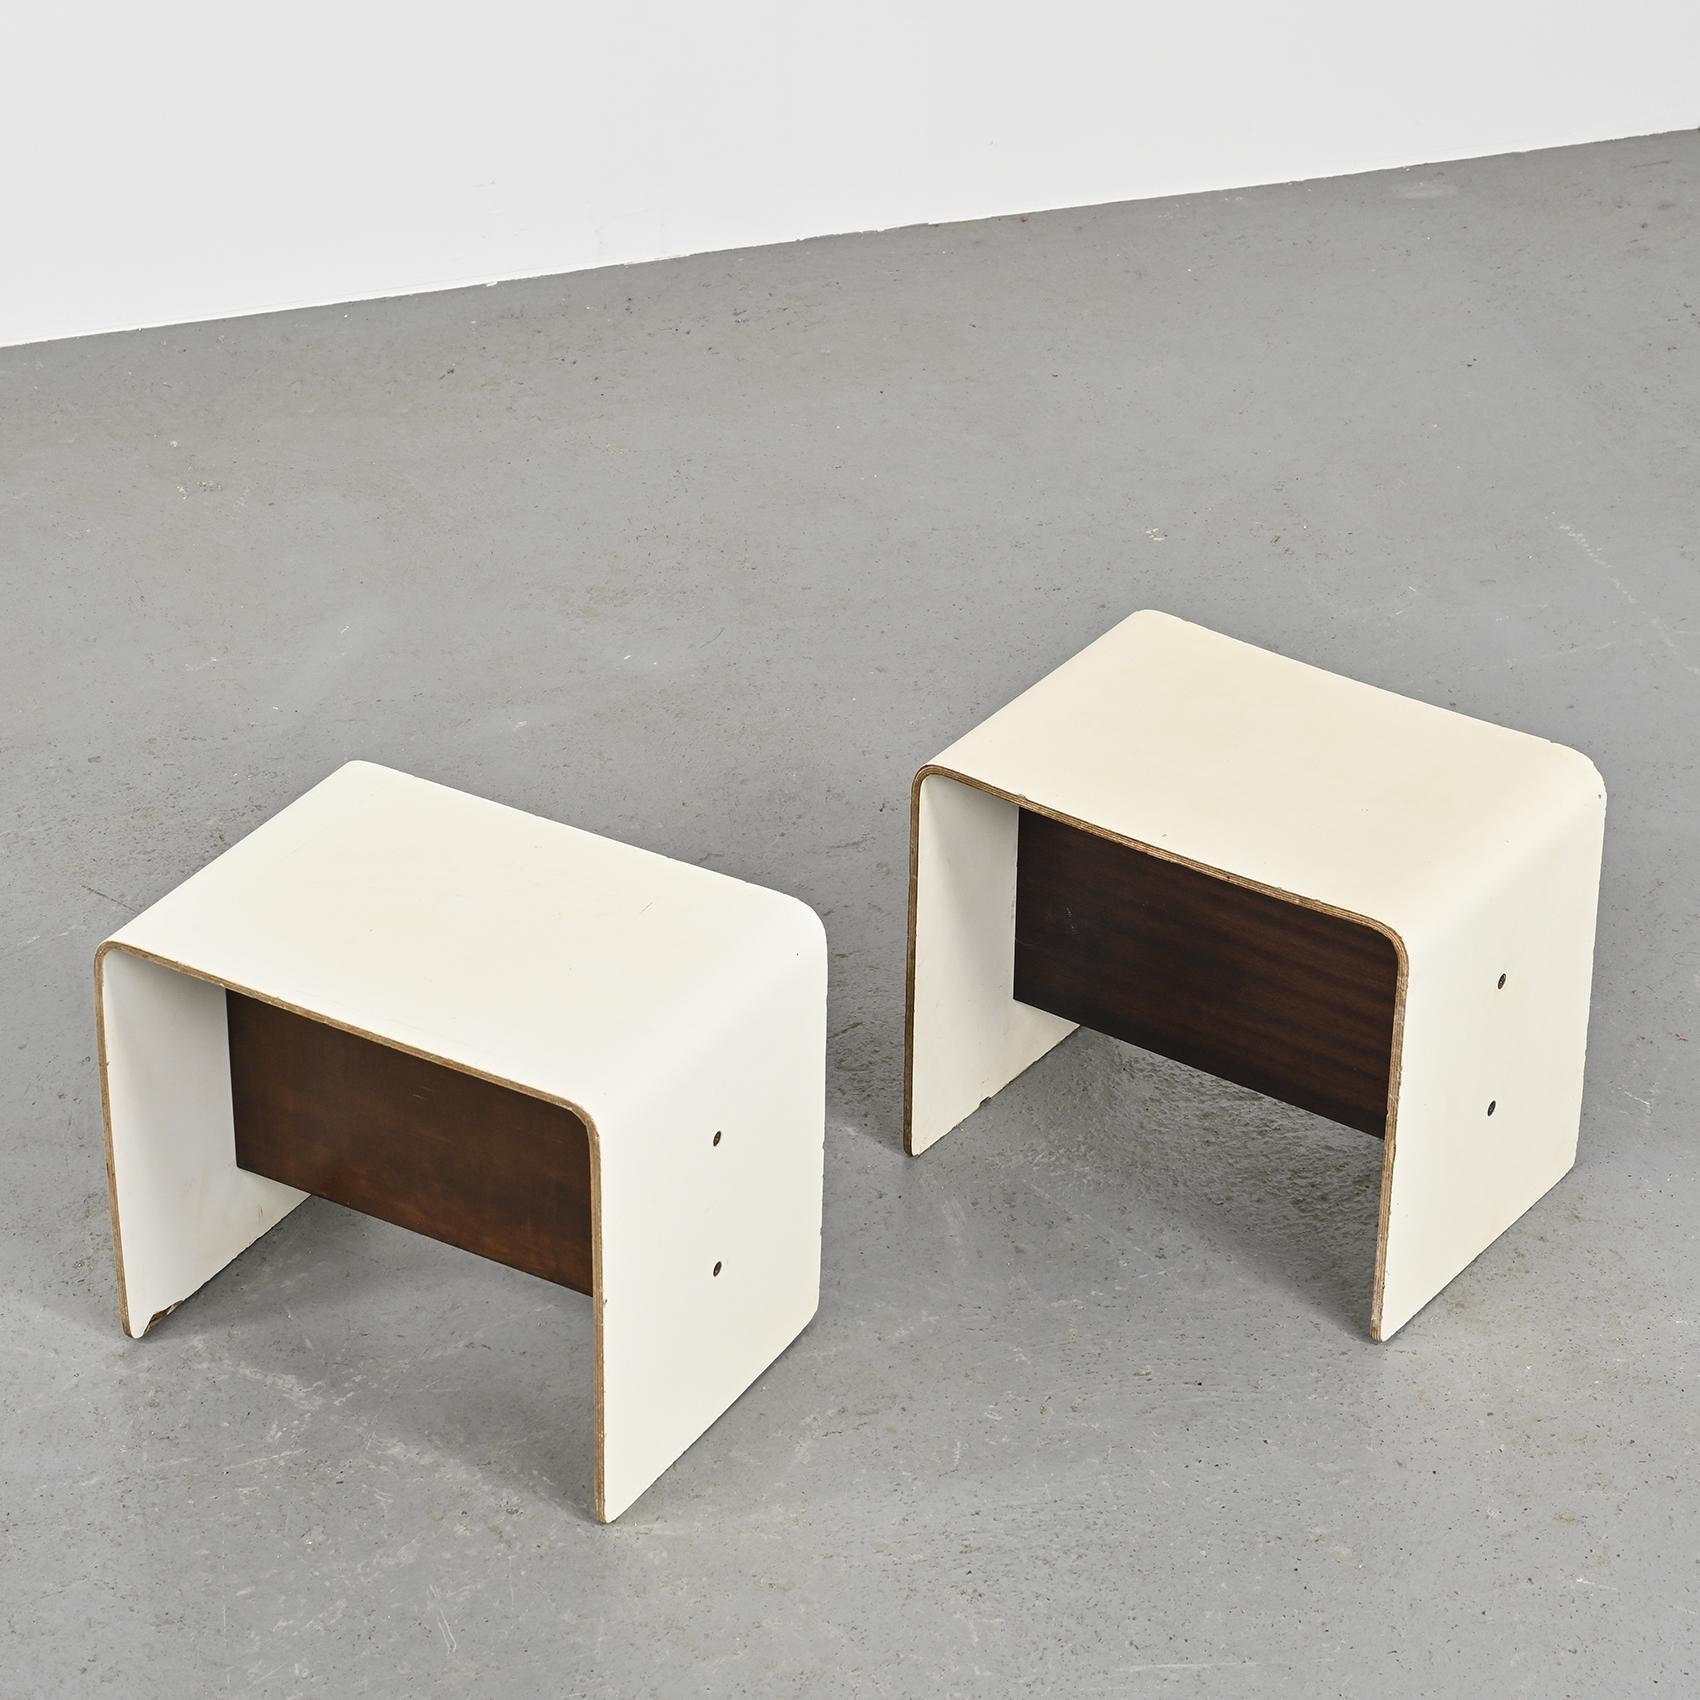 20th Century  Pair of Bedside Tables by Pierre Guariche, circa 1968 For Sale